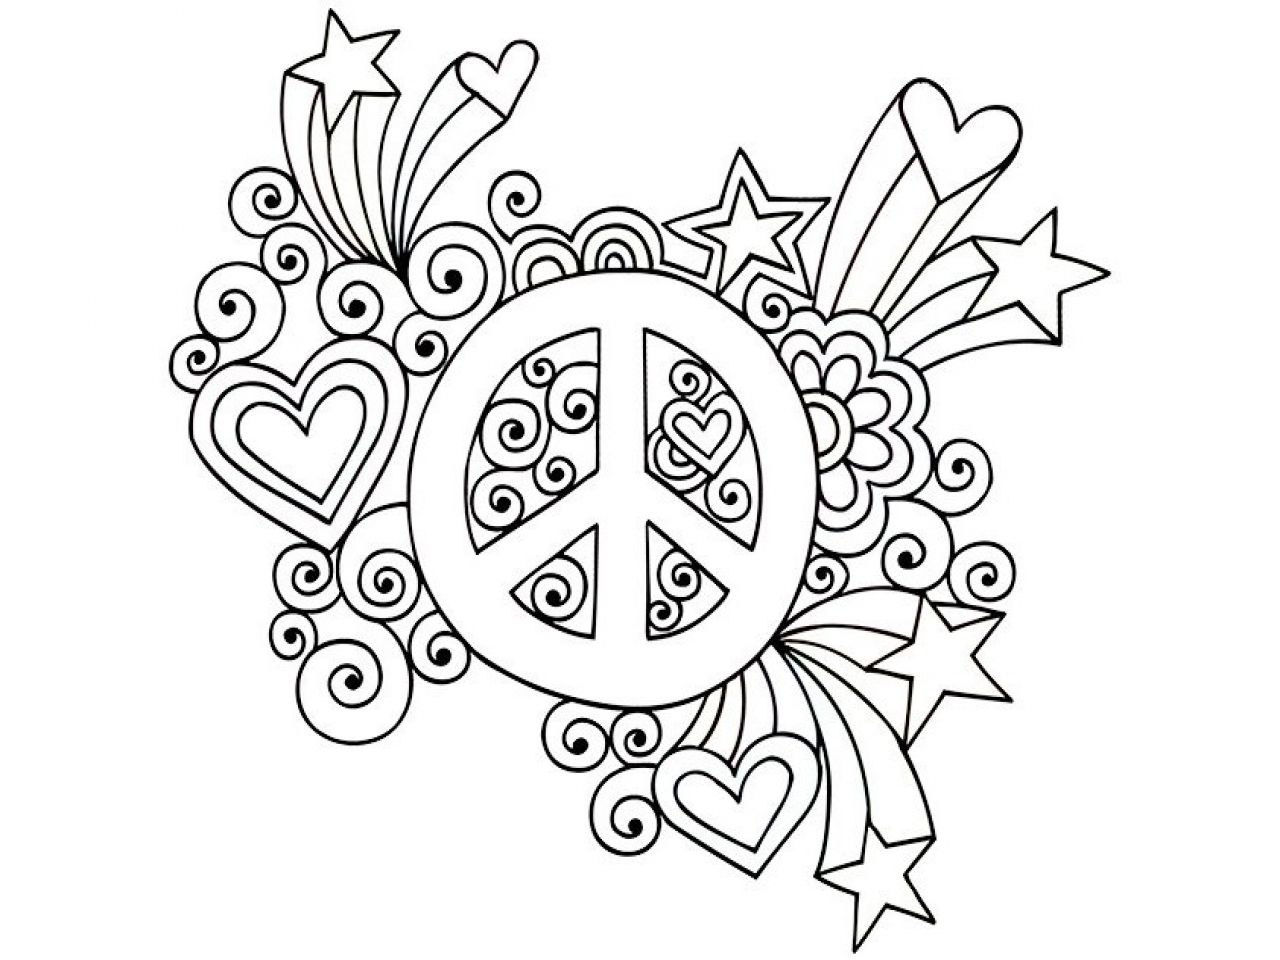 peace sign coloring pages for adults